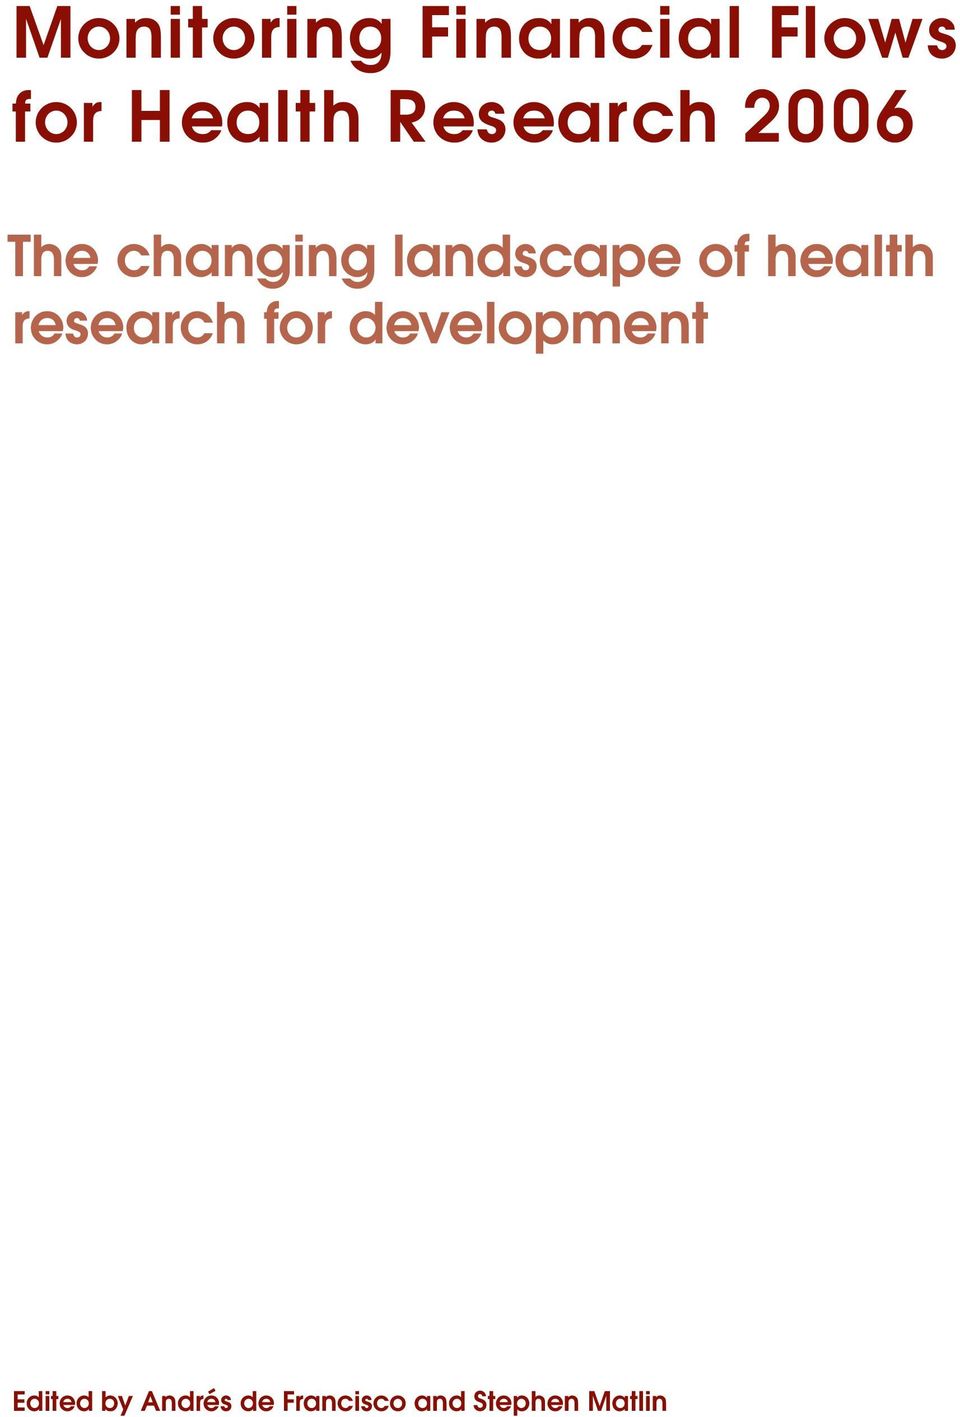 health research for development Edited